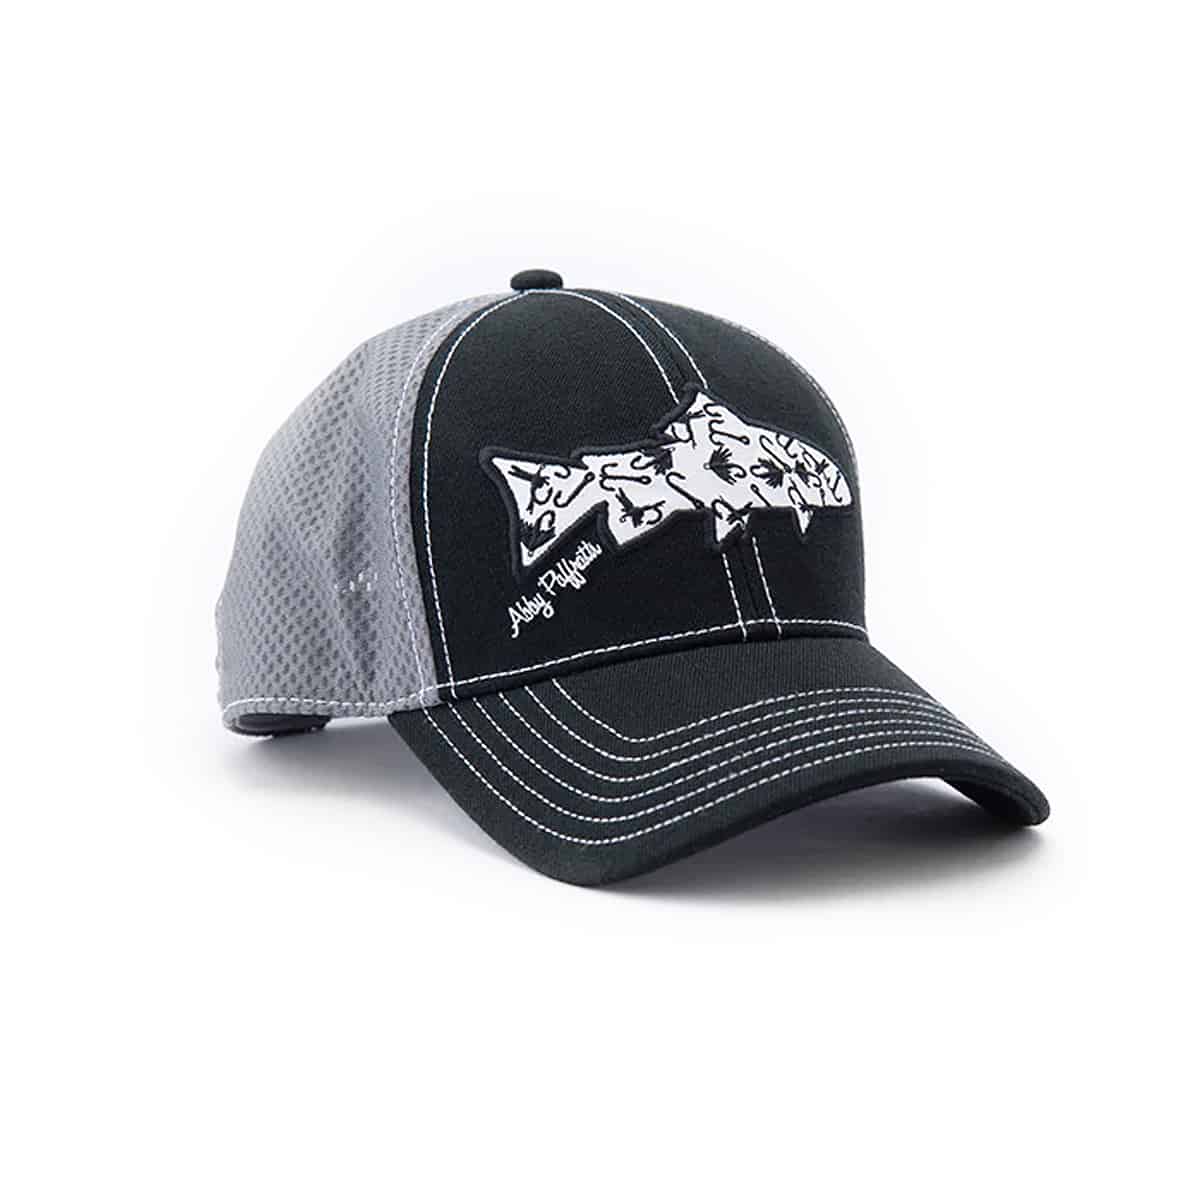 850029265122 art 4 all tie one on trucker hat by abby paffrath featuring trout patch three quarter